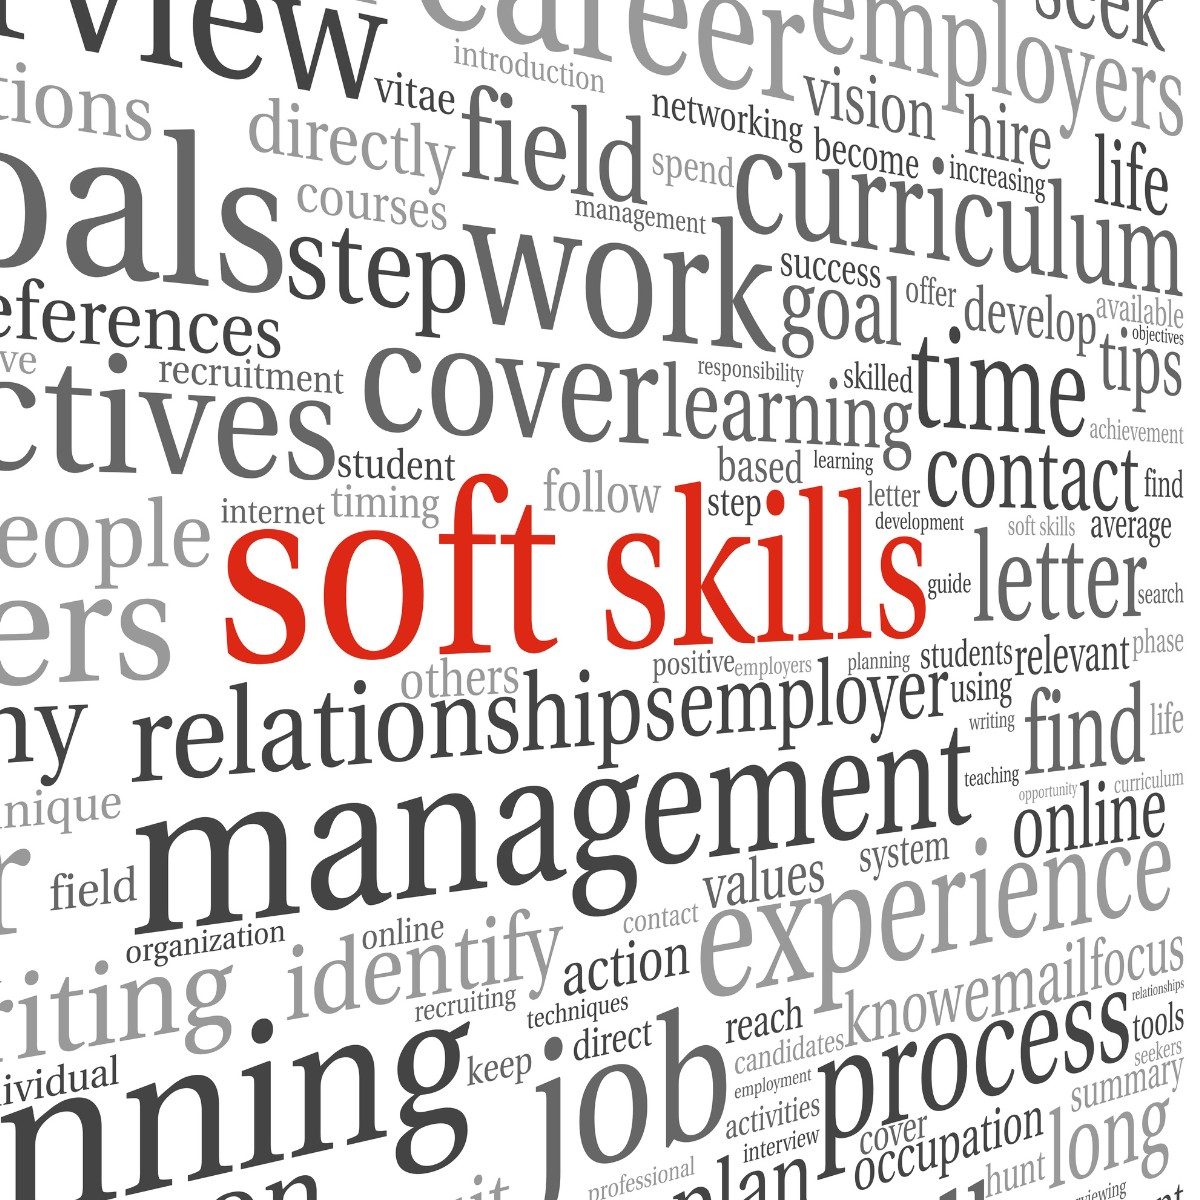 Hiring for soft skills is important because they are transferable skills that can be used in different types of roles, making it easier for employees to transition into new roles and contribute to the team. Soft skills are also important for fostering good relationships between team members and creating a positive work environment. They can be used to increase motivation, collaboration, and build a culture of trust and respect. Lastly, soft skills can help employees handle difficult situations more effectively, which can lead to better overall outcomes.